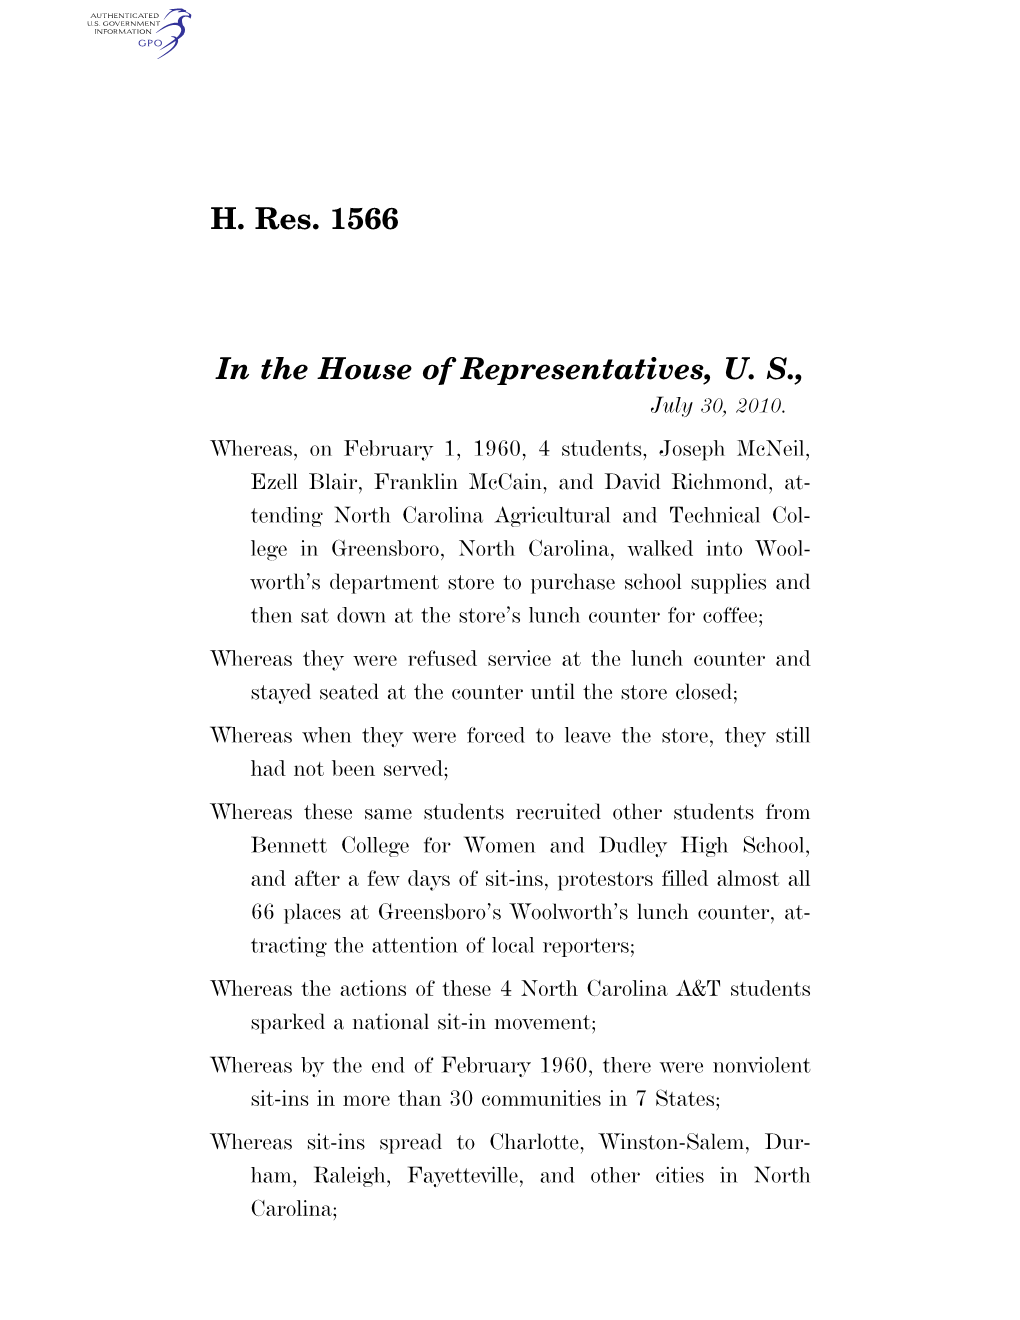 H. Res. 1566 in the House of Representatives, U